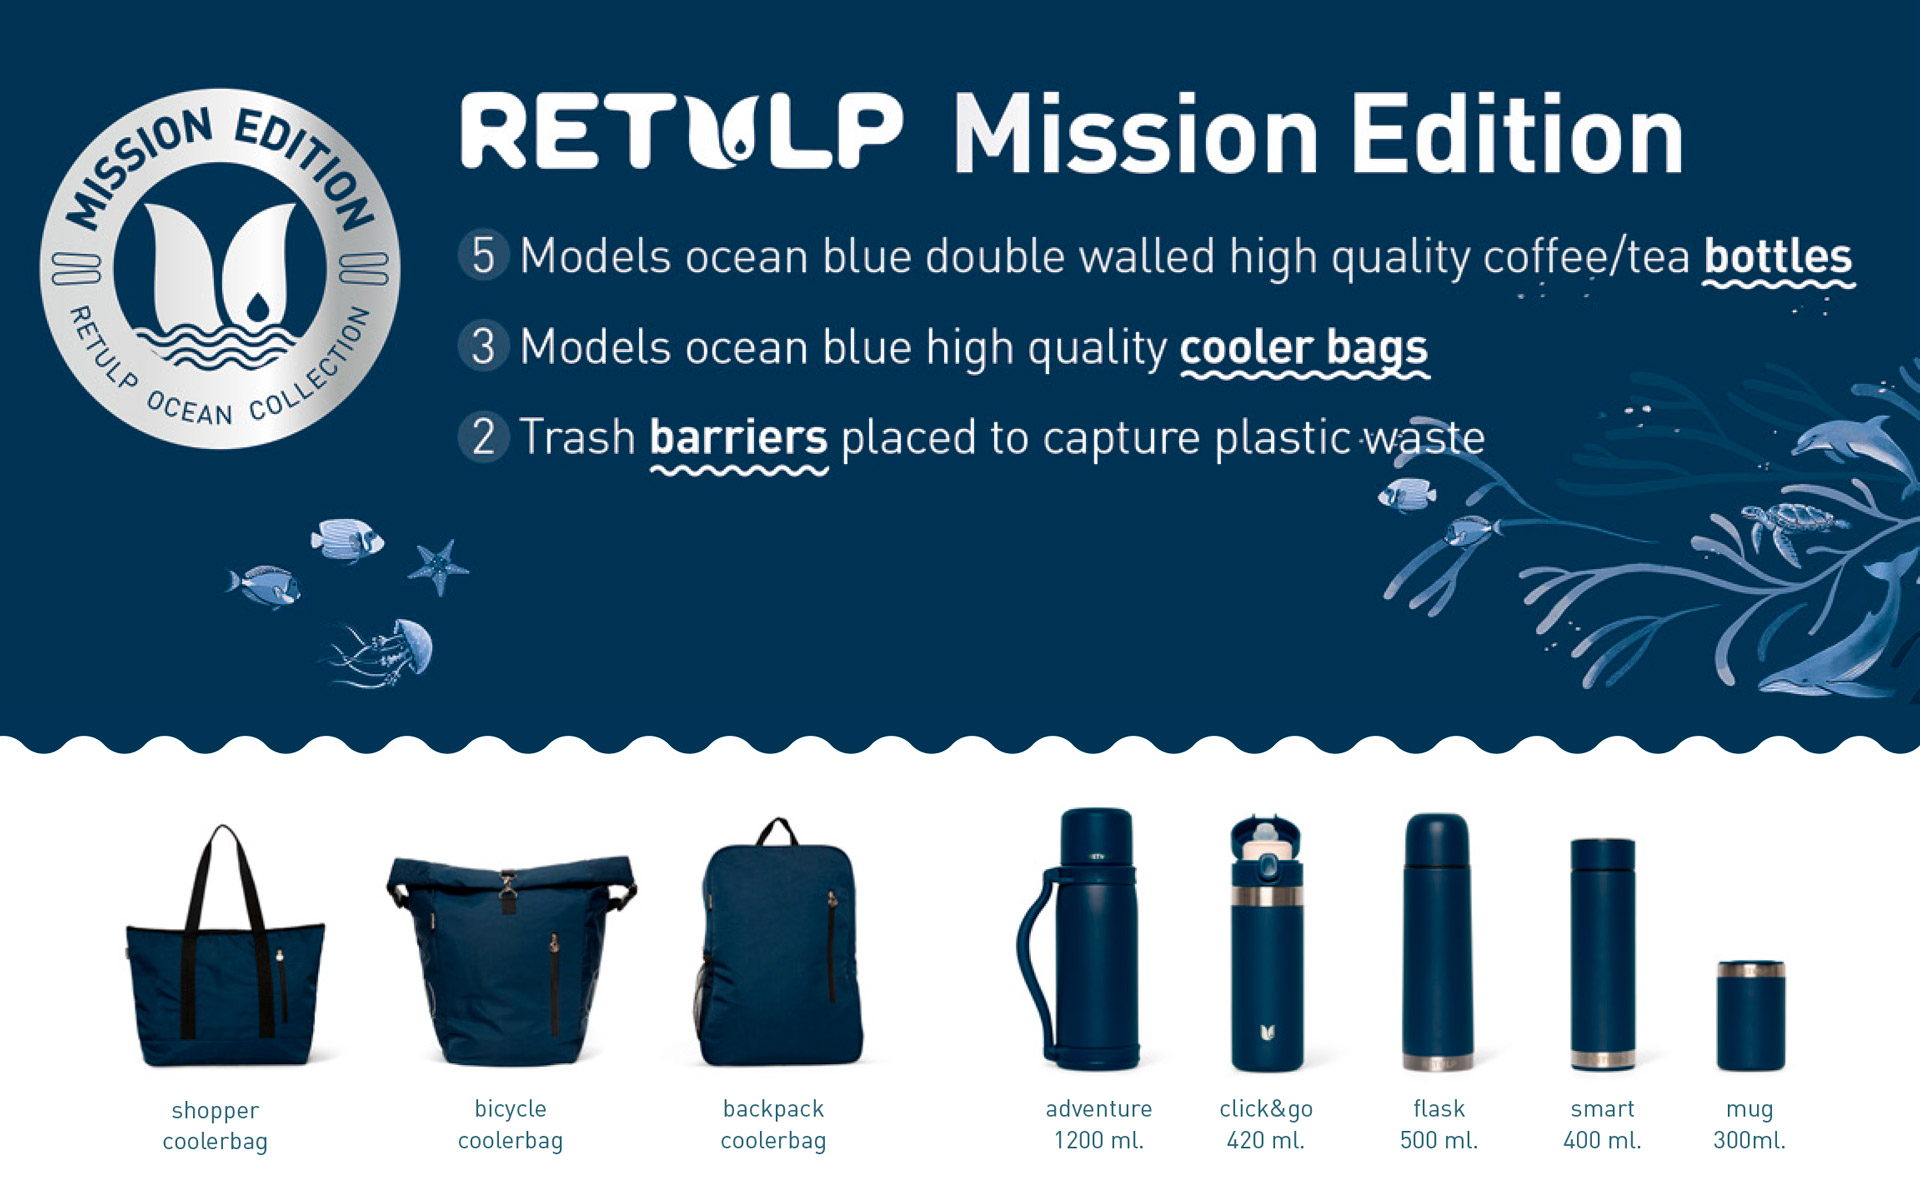 Retulp Mission Edition Ocean collection